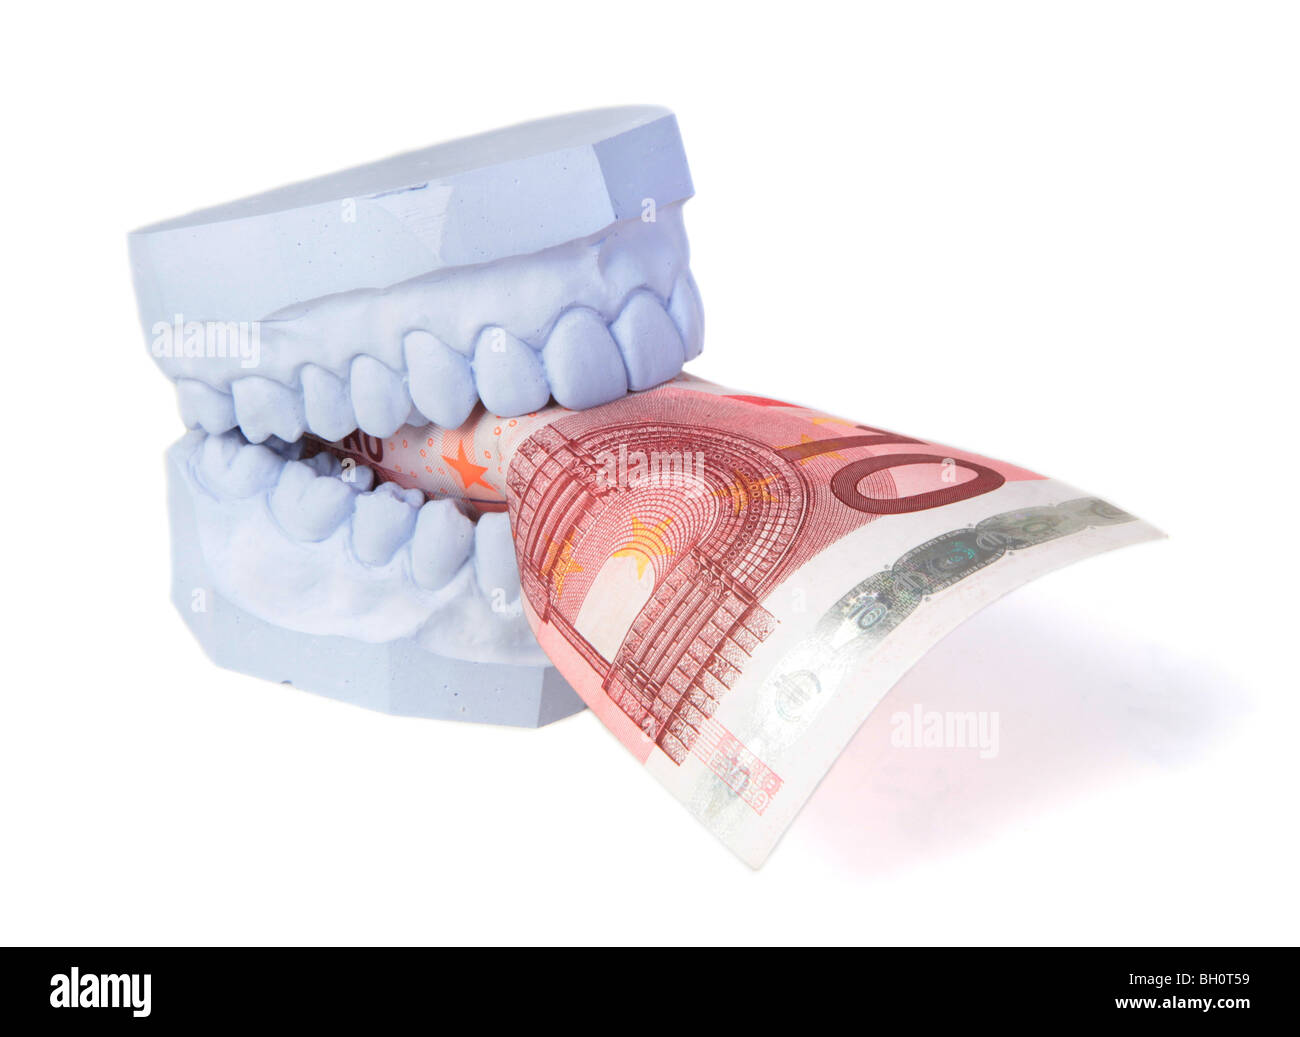 A set of teeth with some money. All isolated on white background. Stock Photo